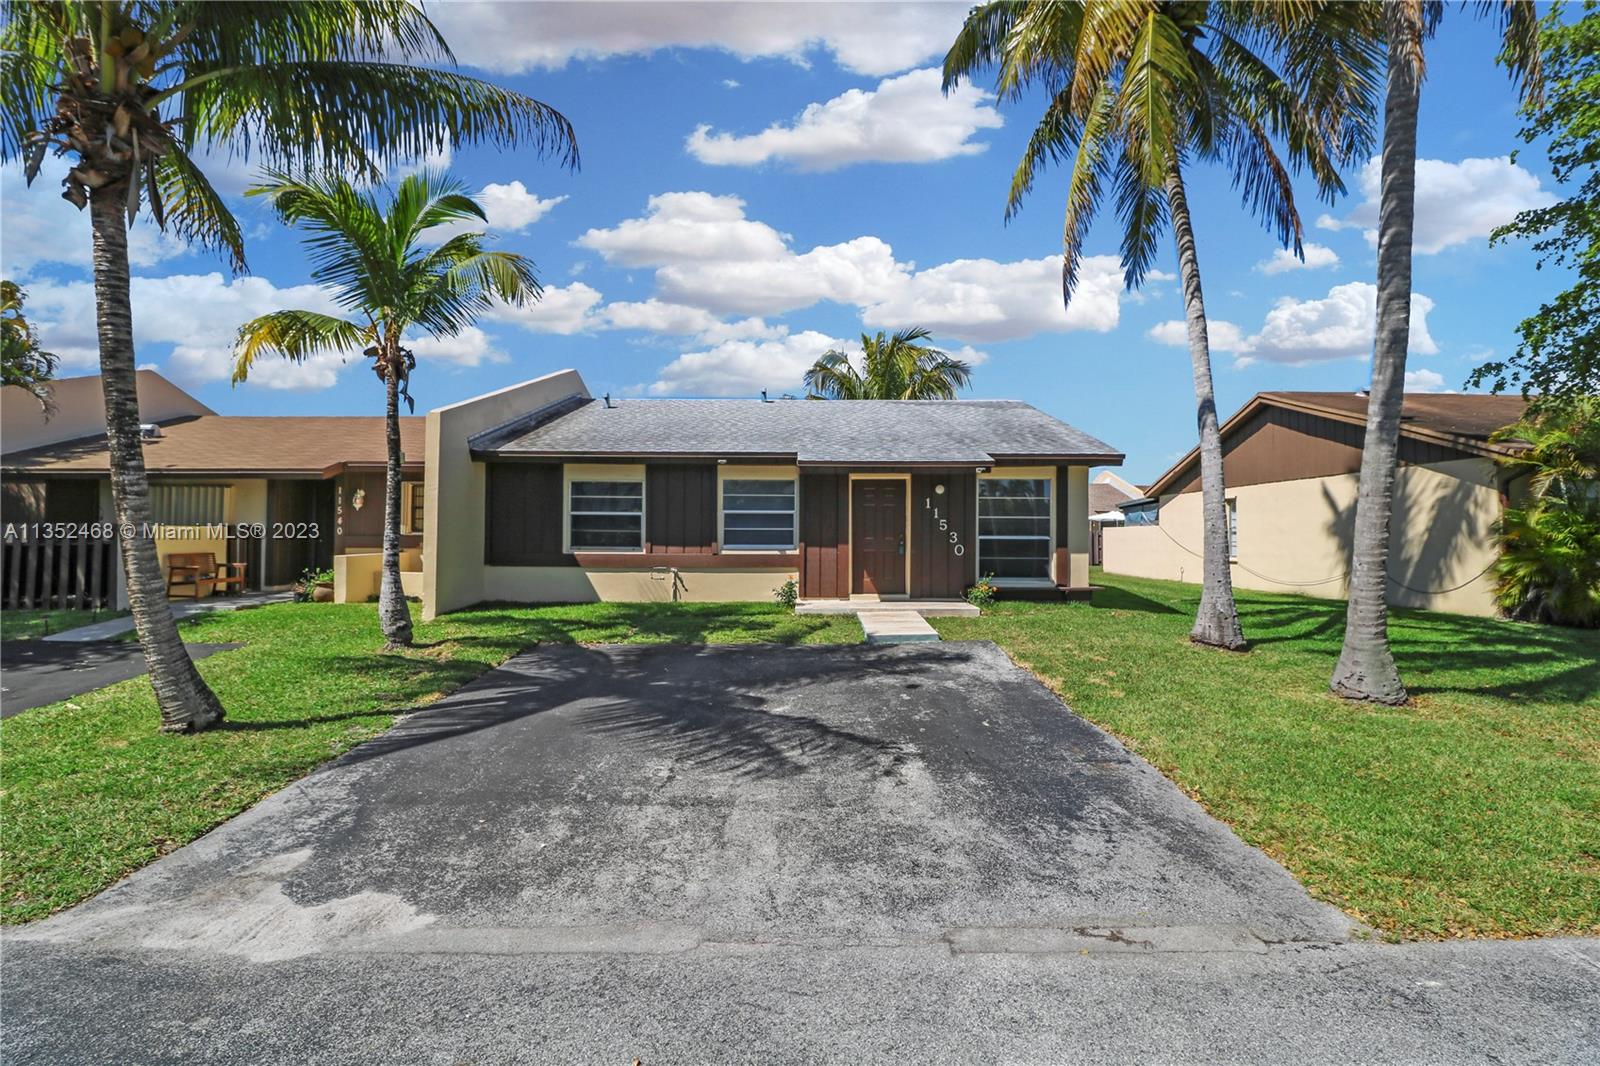 Photo 1 of 11530 122nd Pl in Miami - MLS A11352468